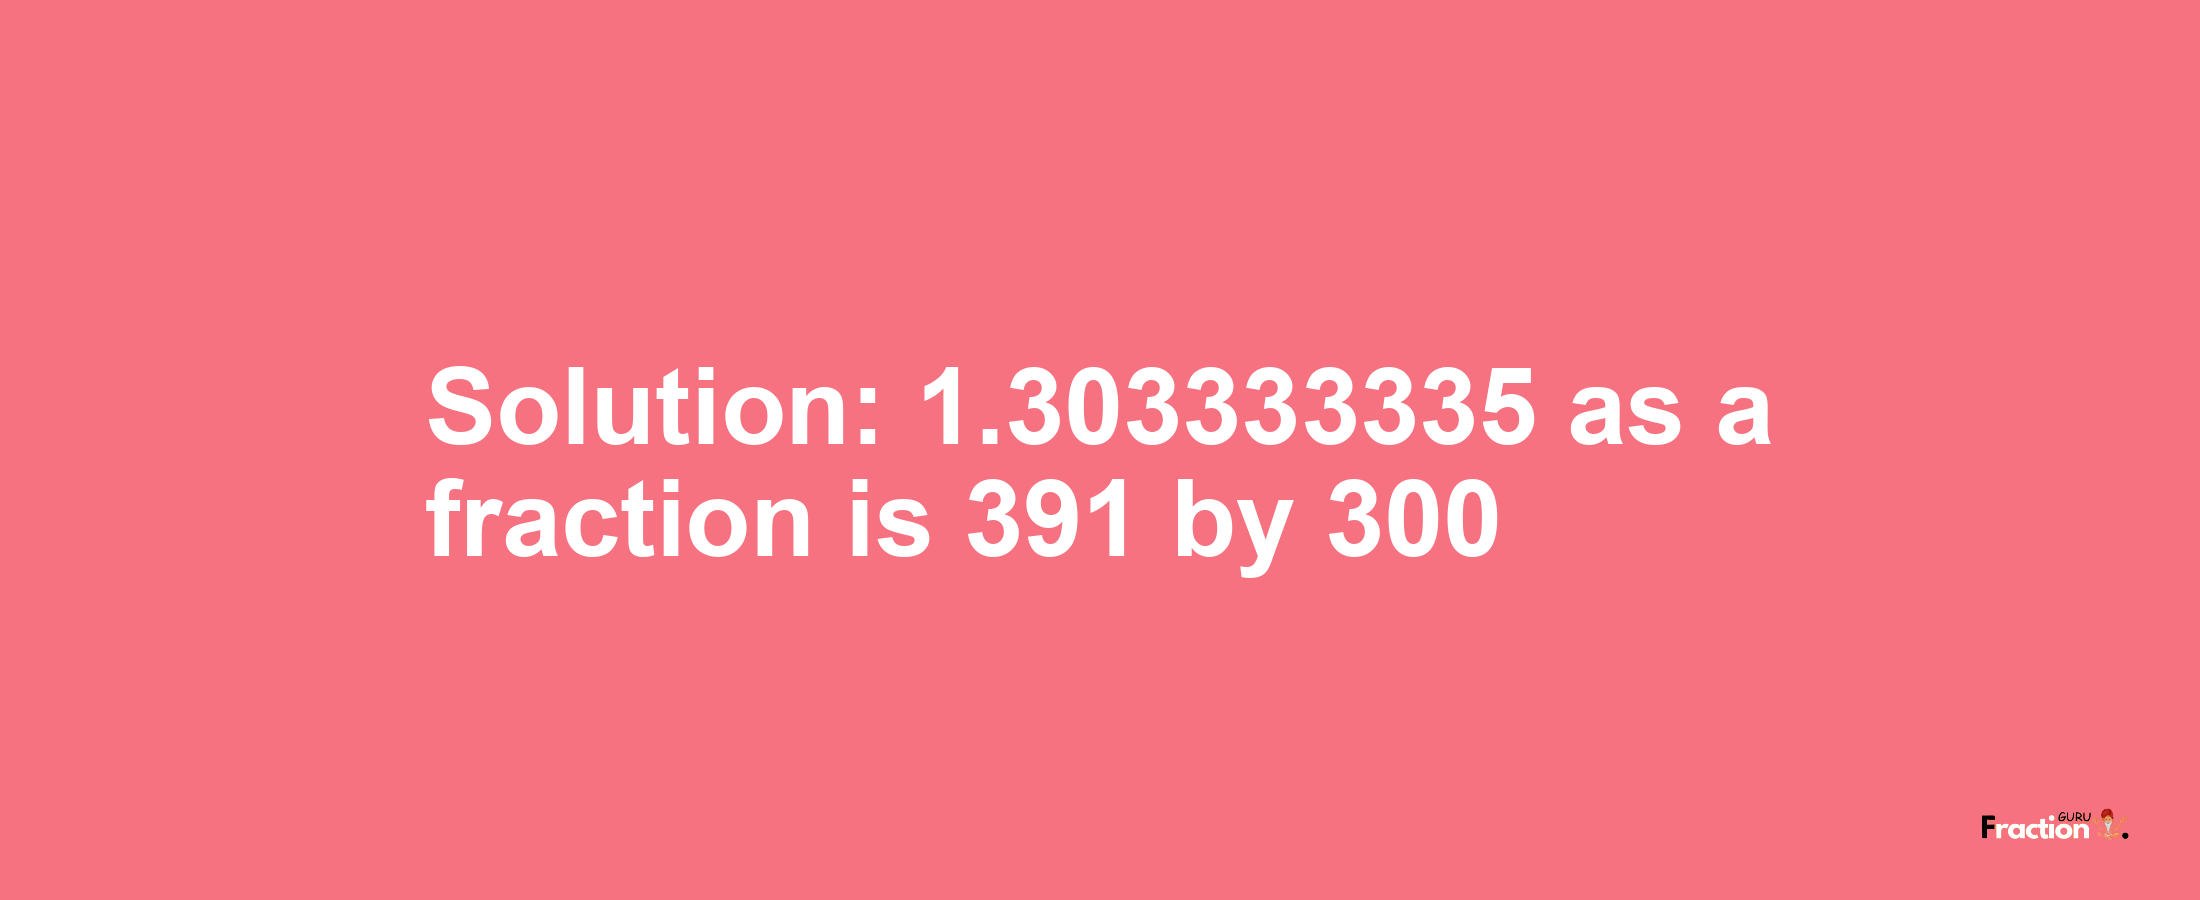 Solution:1.303333335 as a fraction is 391/300